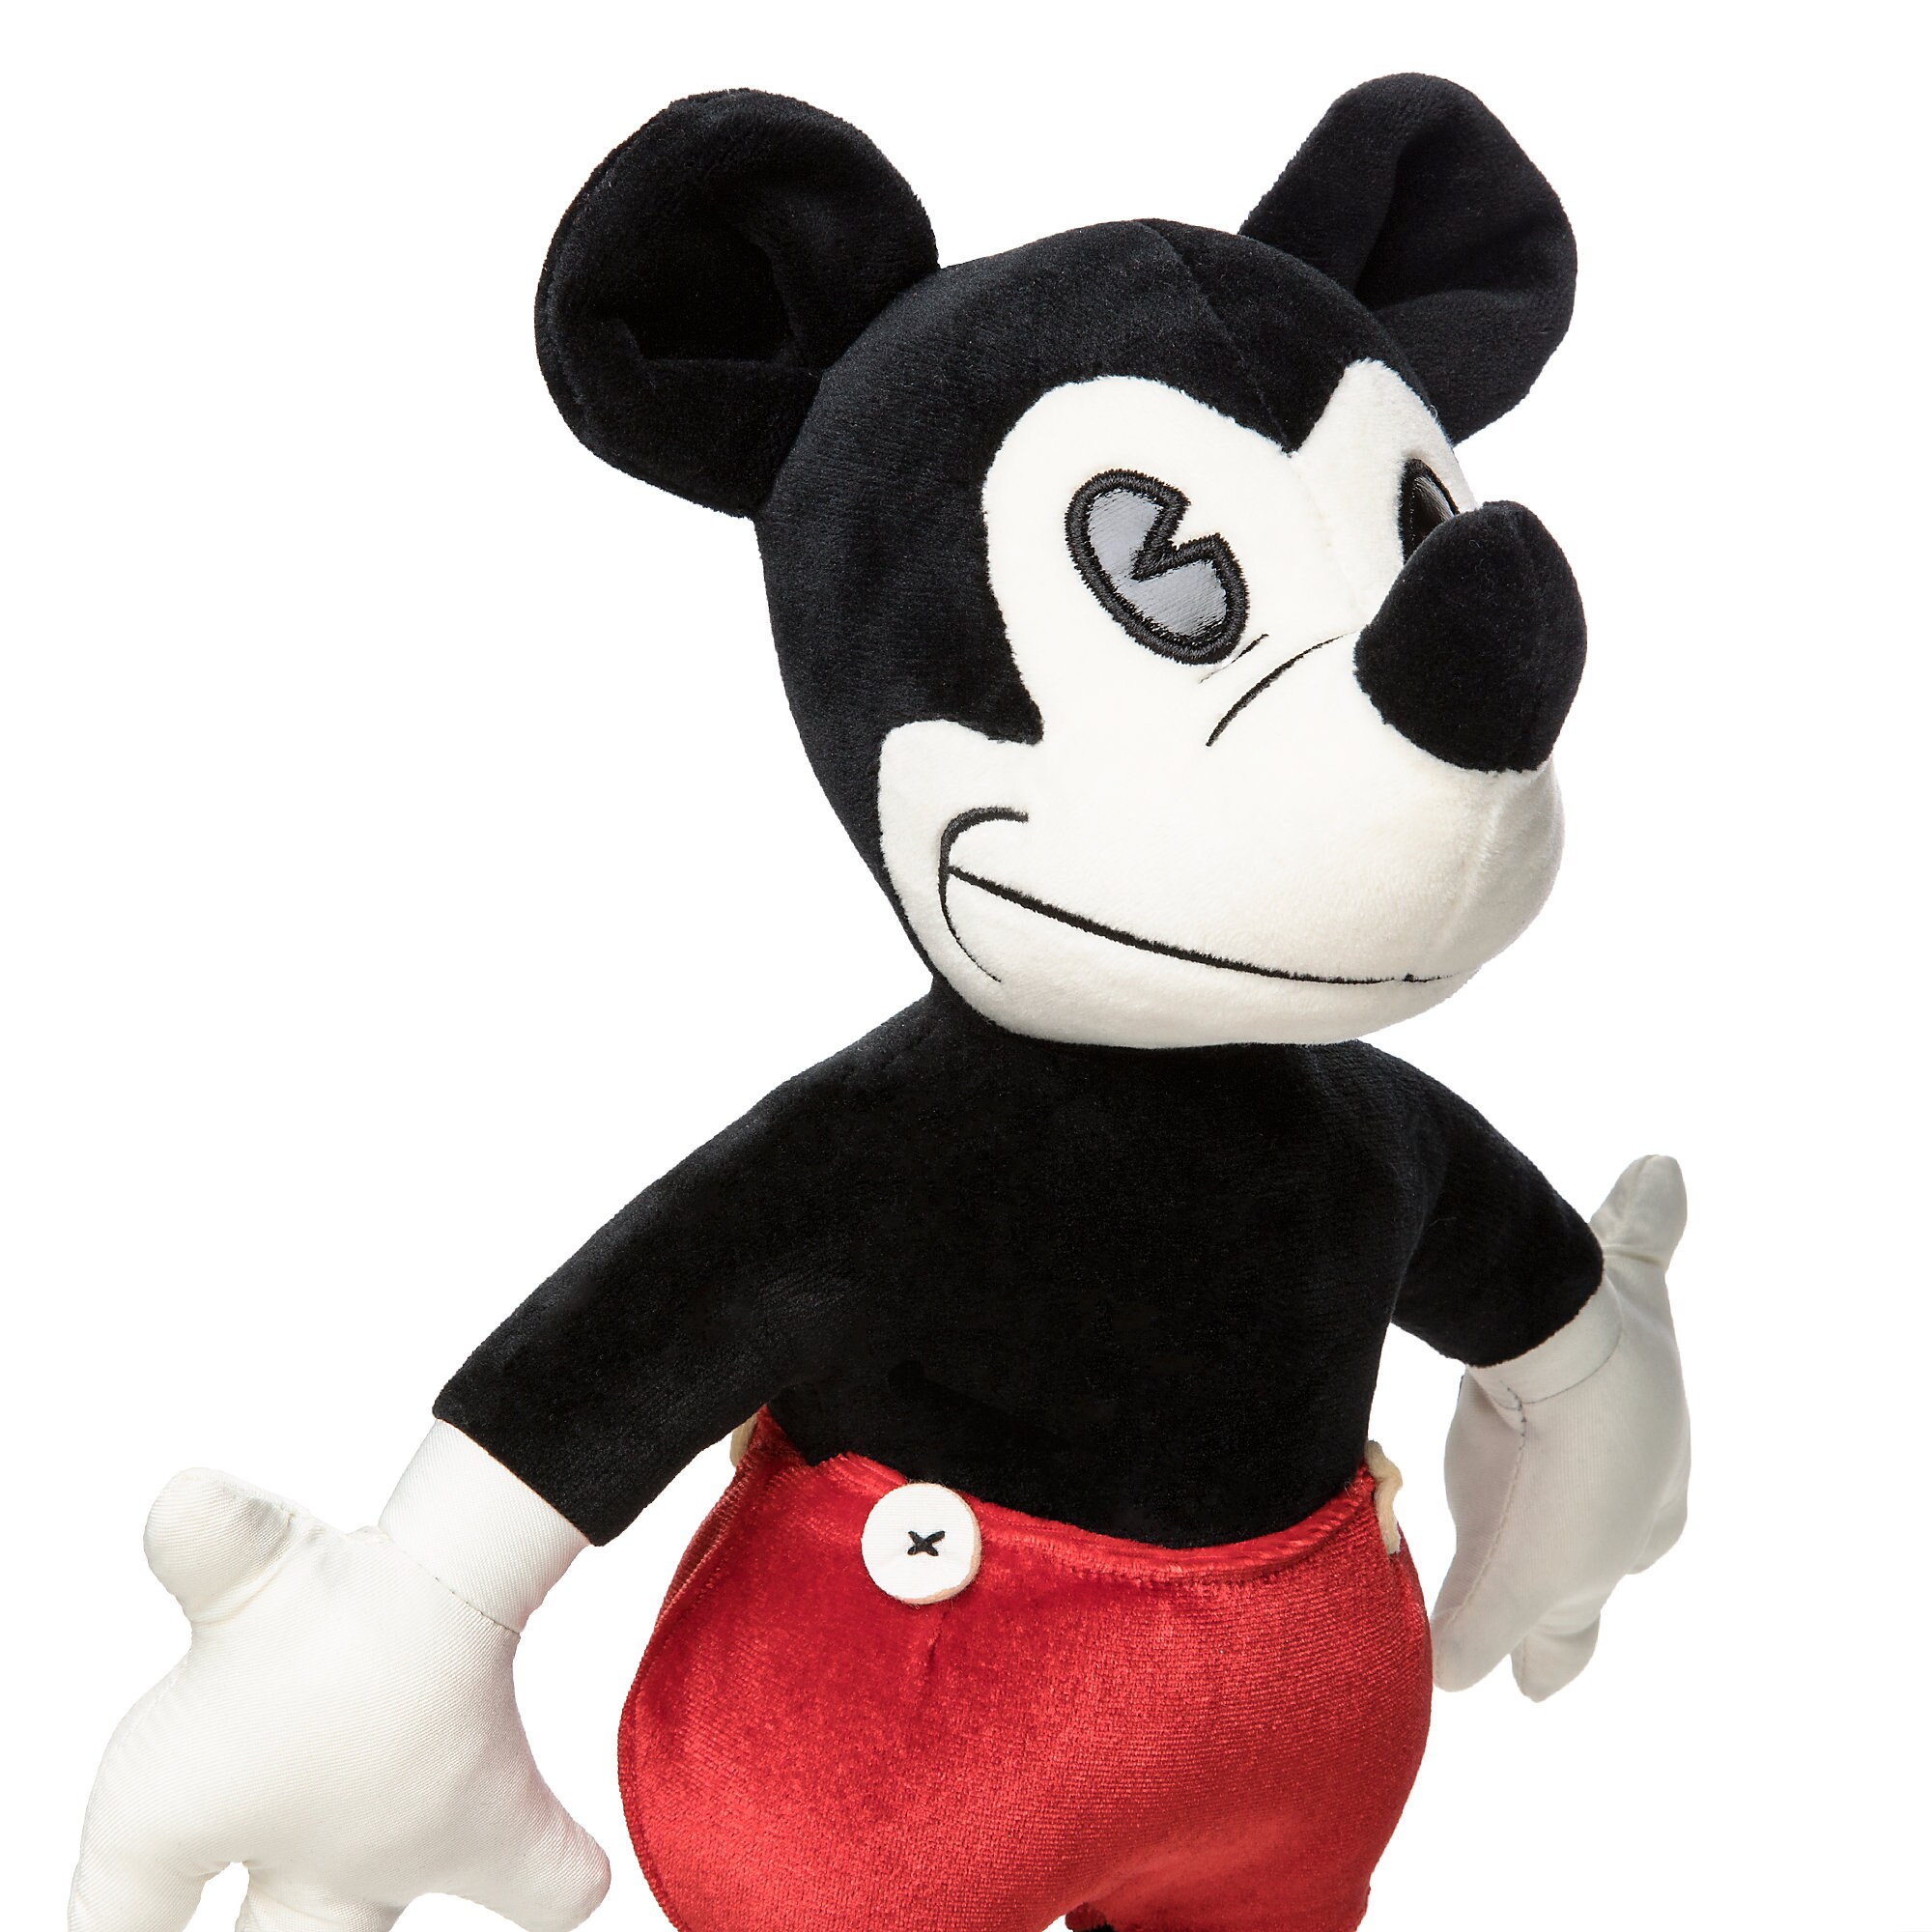 Mickey and Minnie Mouse Collectible Plush Doll Set - Limited Release